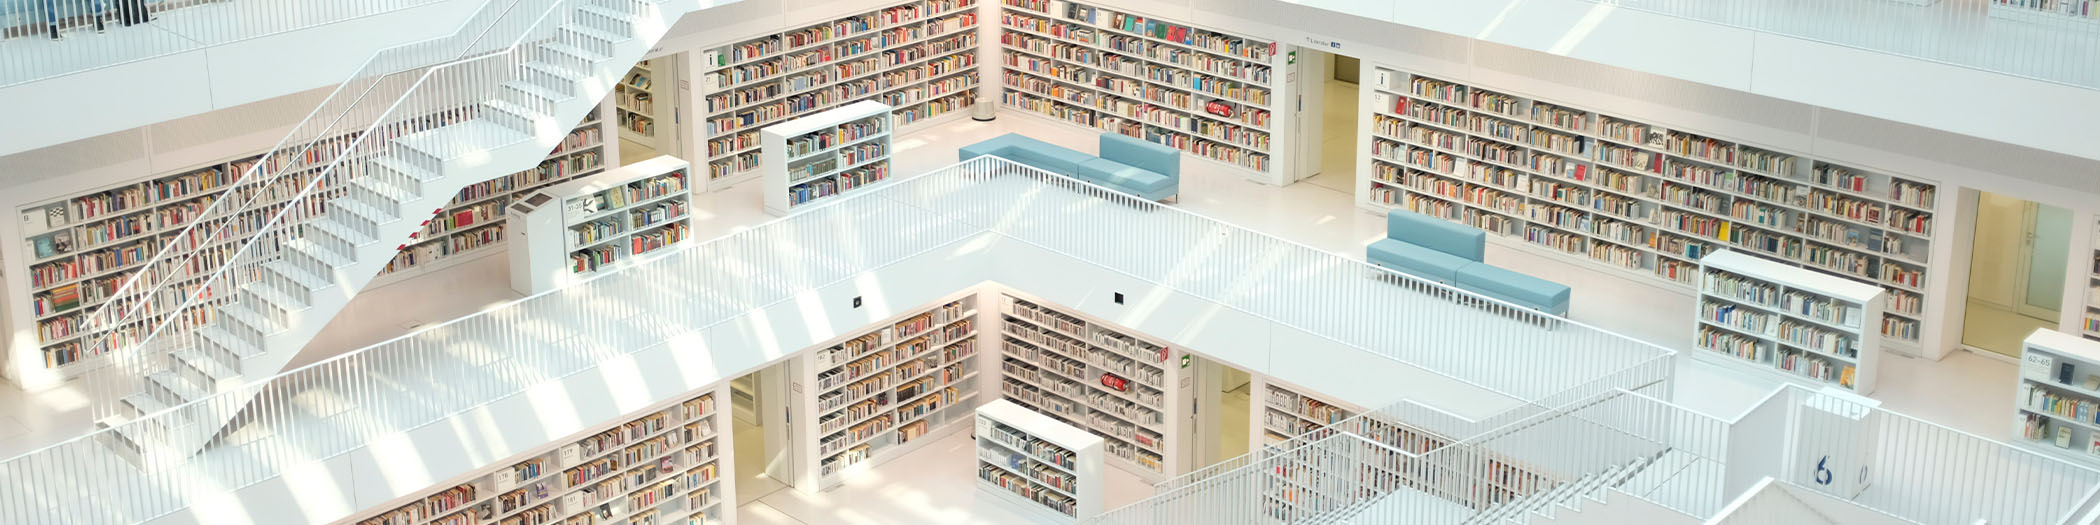 Large open library